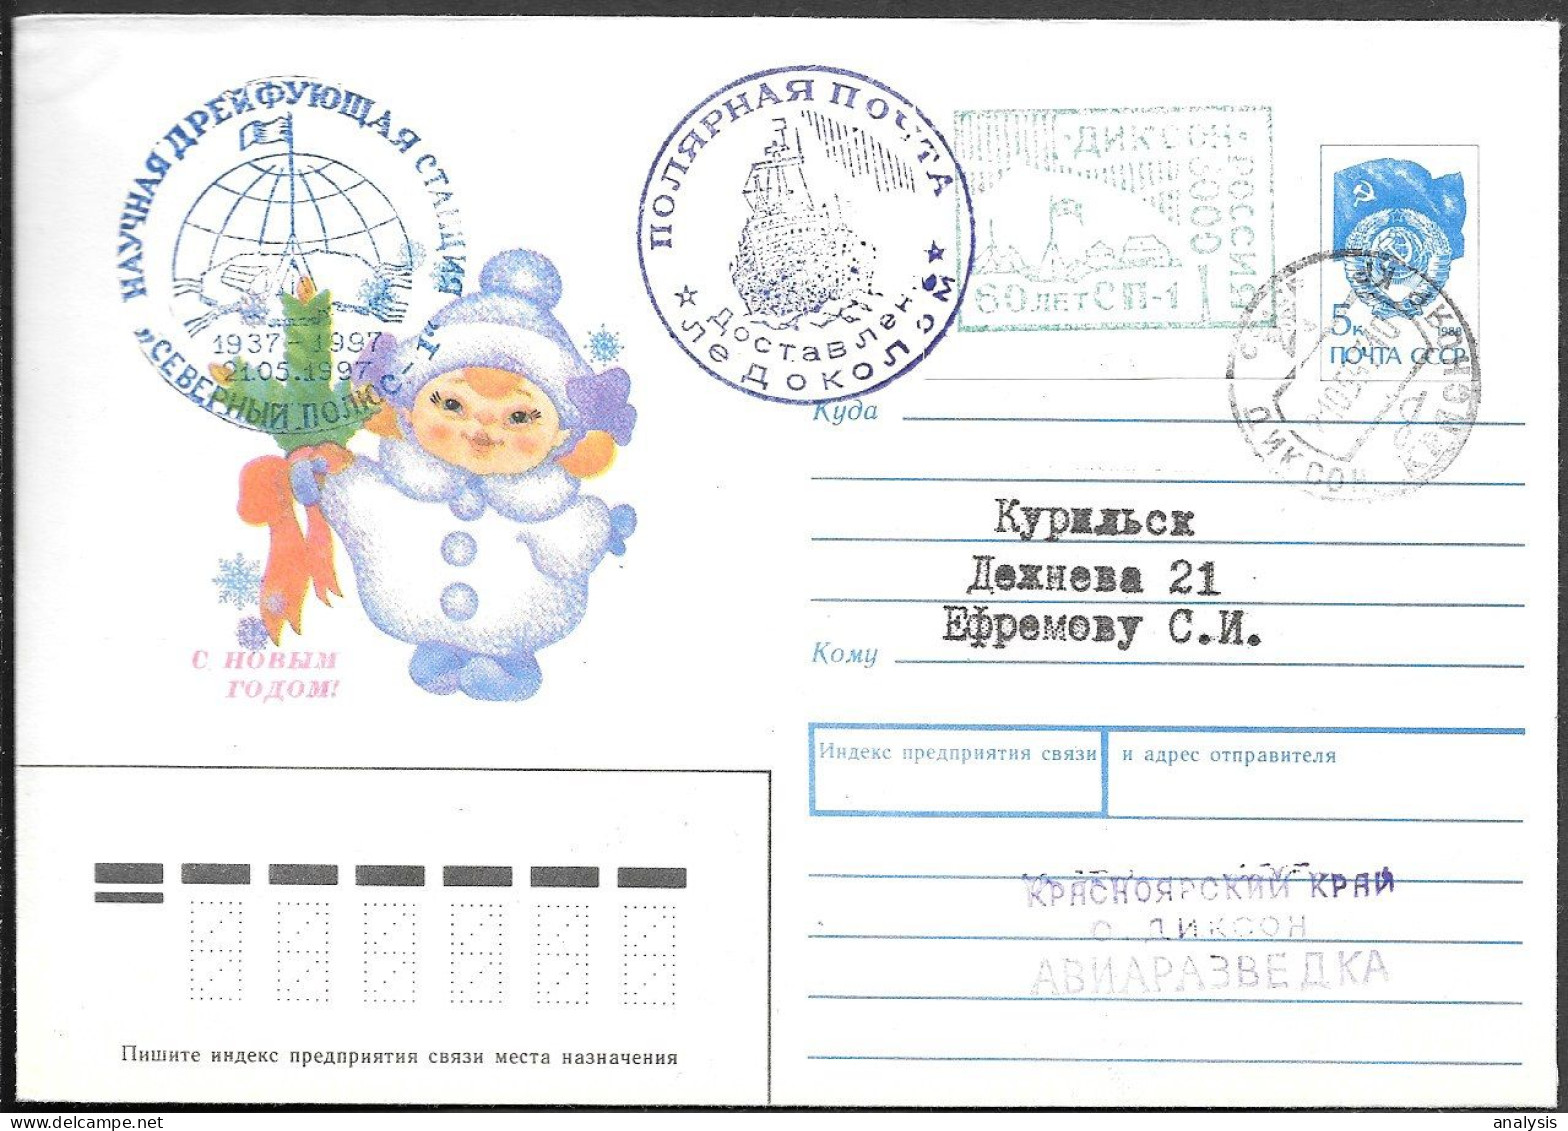 Russia Dikson North Pole Station Cover Mailed To Kurilsk Iturup 1997 - Scientific Stations & Arctic Drifting Stations